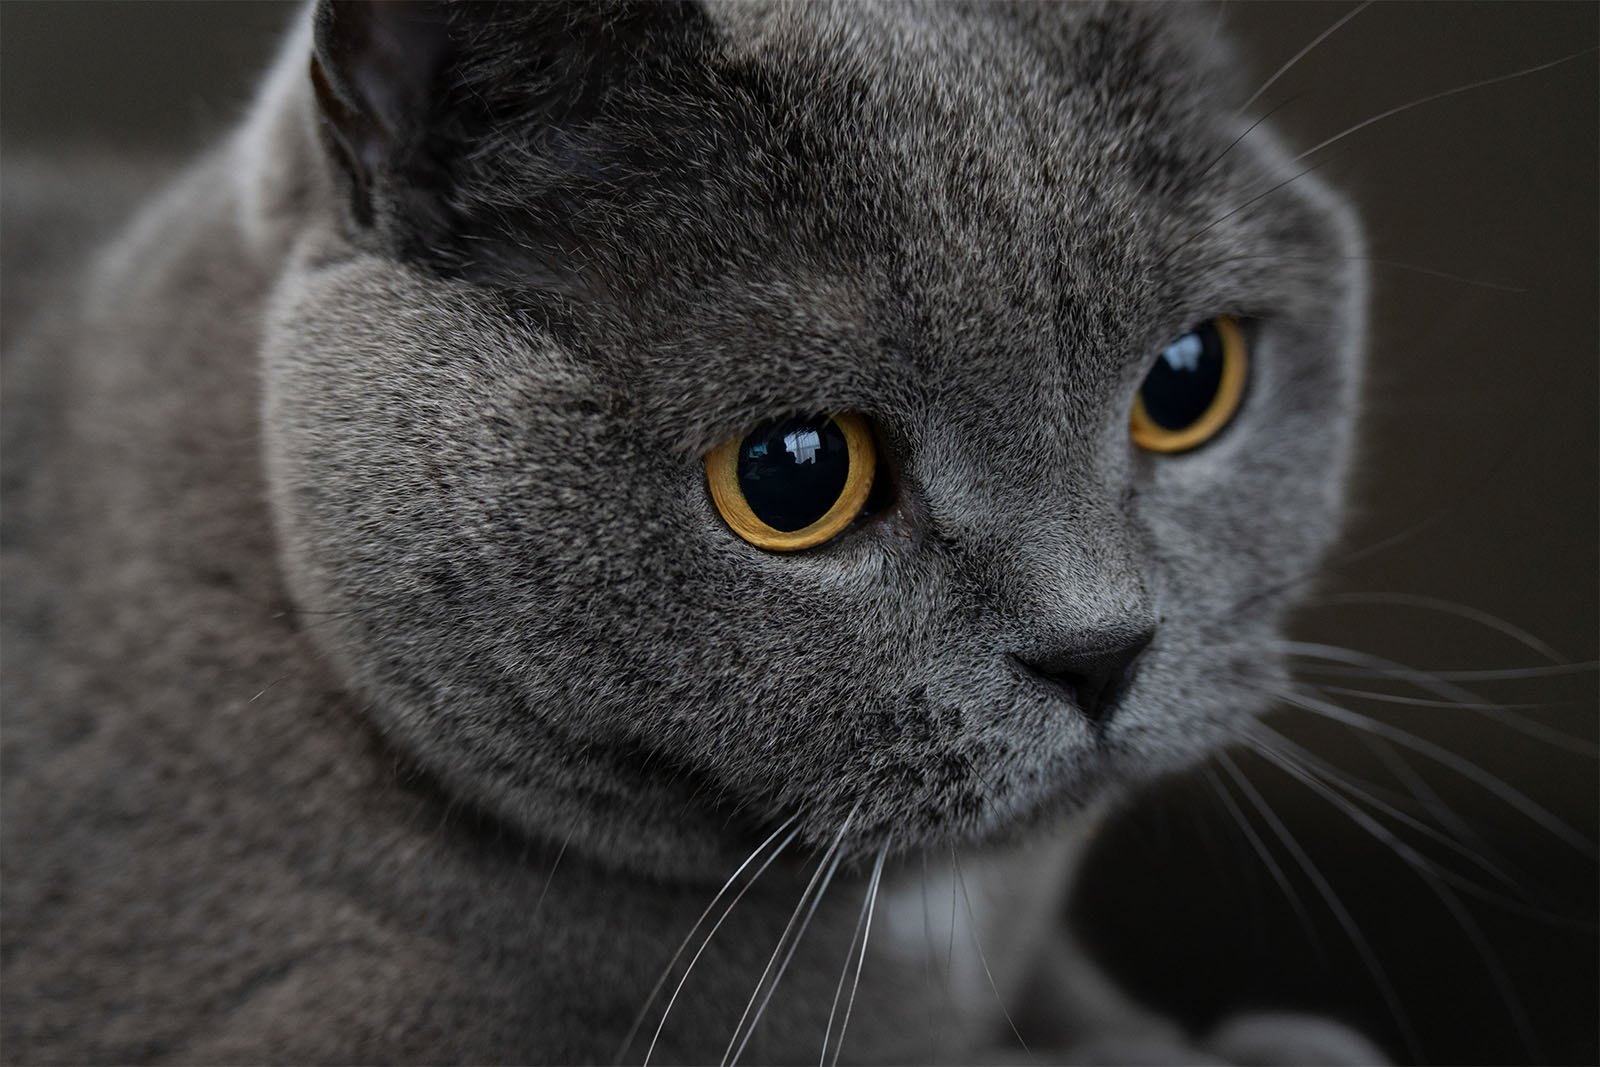 Close-up of a gray cat with round, bright yellow eyes and a calm expression. The cat's fur appears dense and plush, and its whiskers are prominent against the background. The image captures the cat's face in detail.